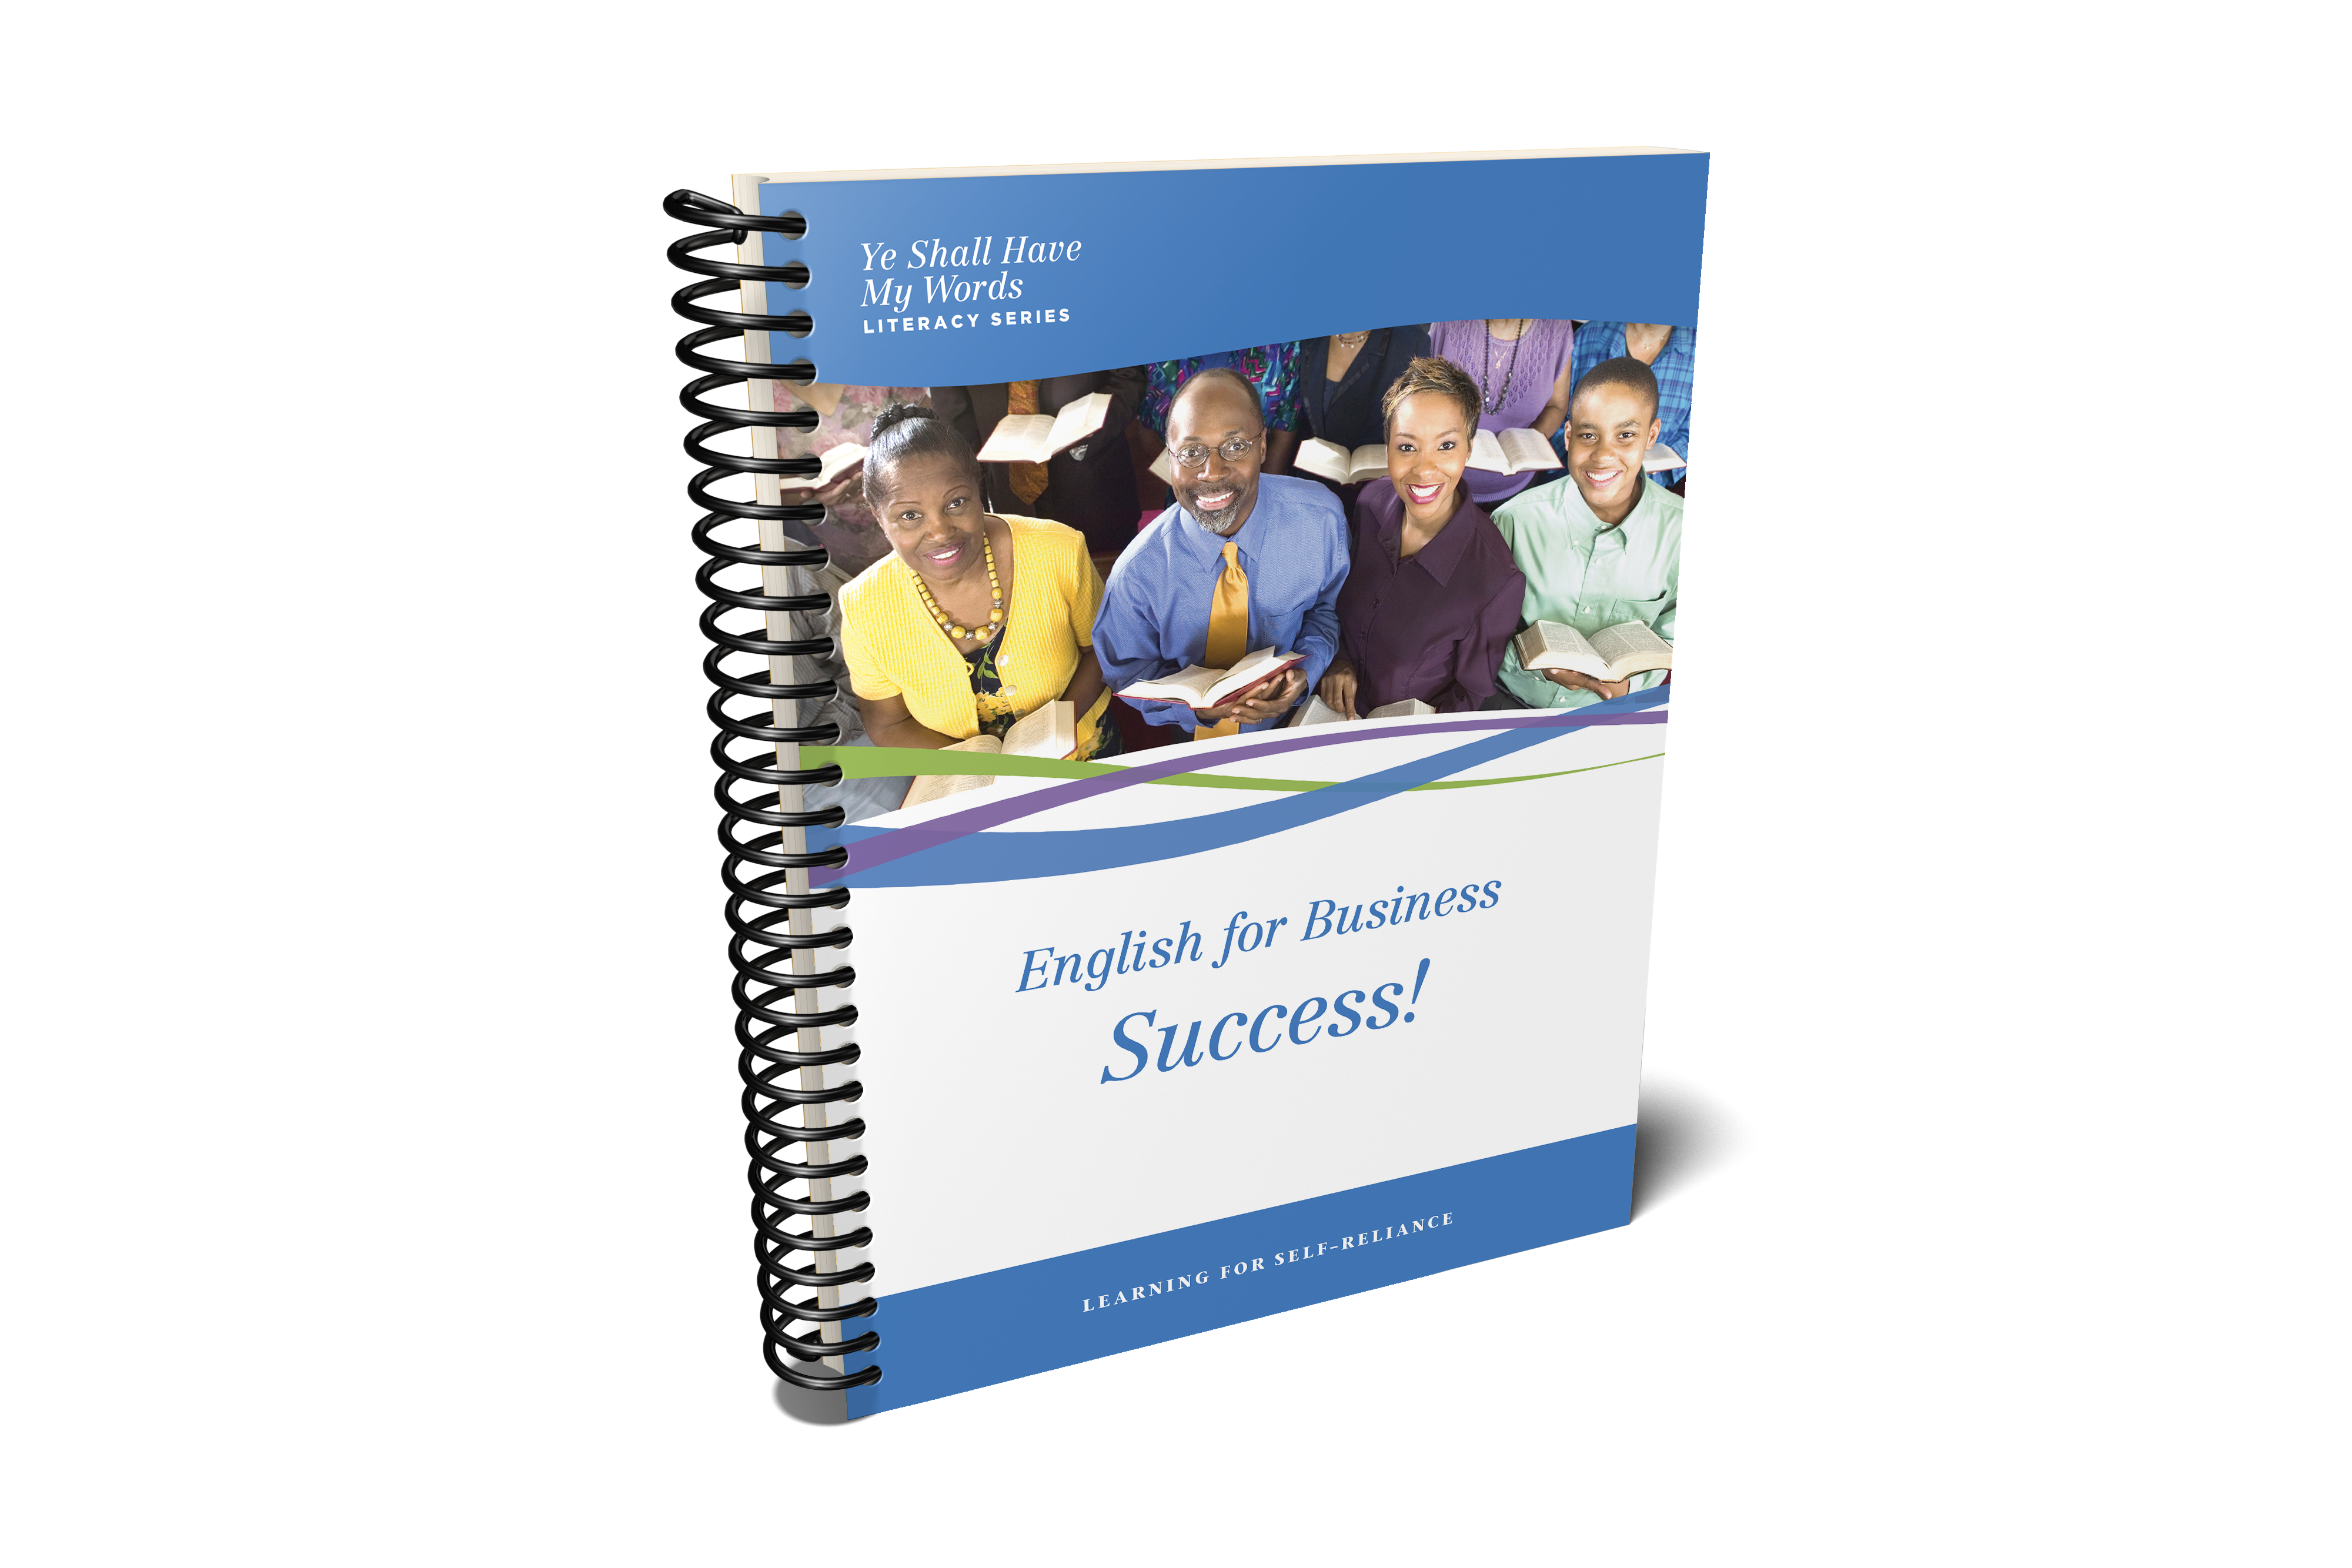 To download the English for Business Success Literacy Manual, please click here:English for Business Success Literacy Manual